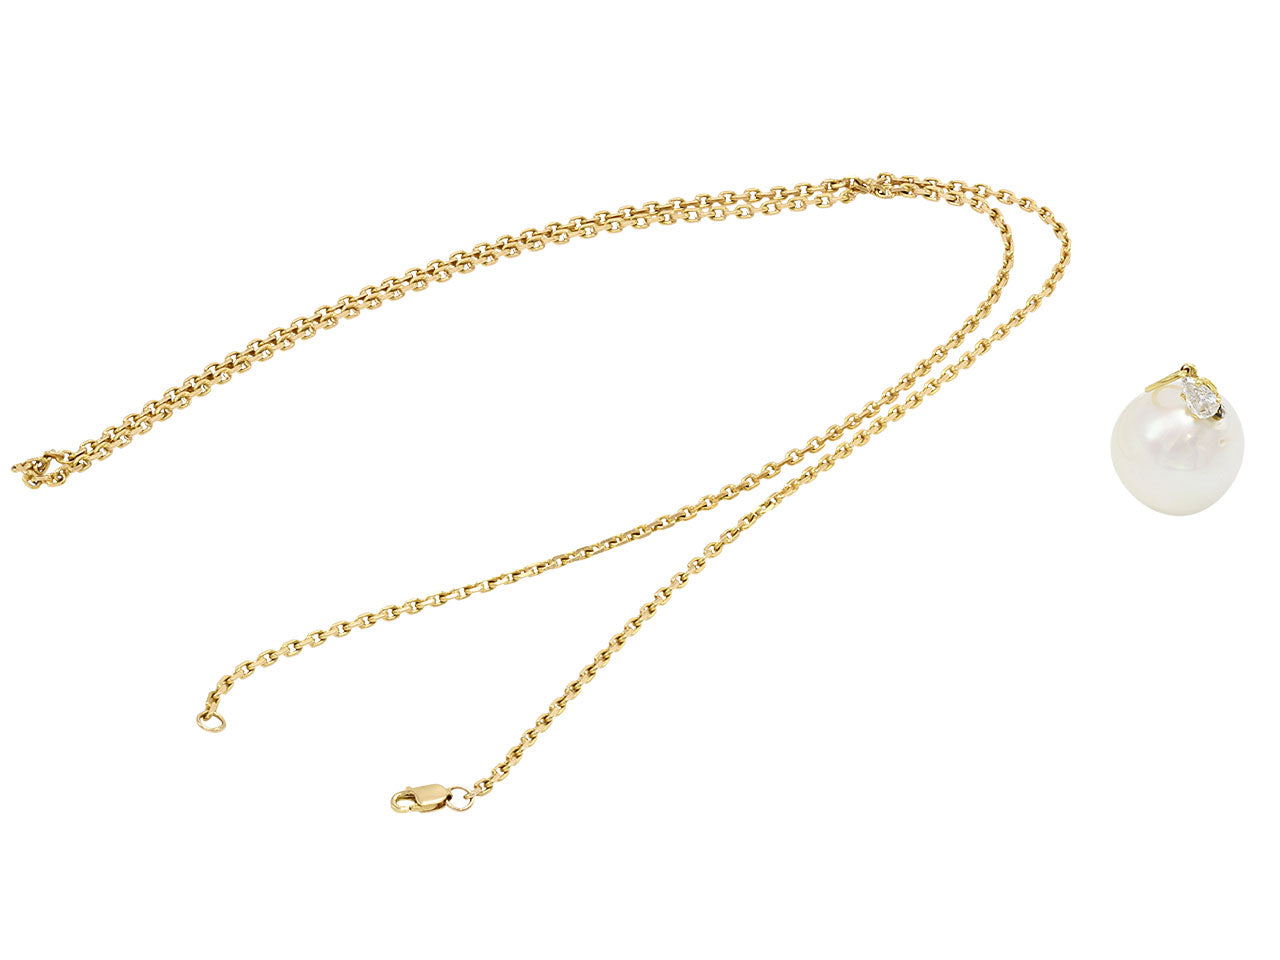 South Sea Pearl and Diamond Chain Pendant in 18K Gold